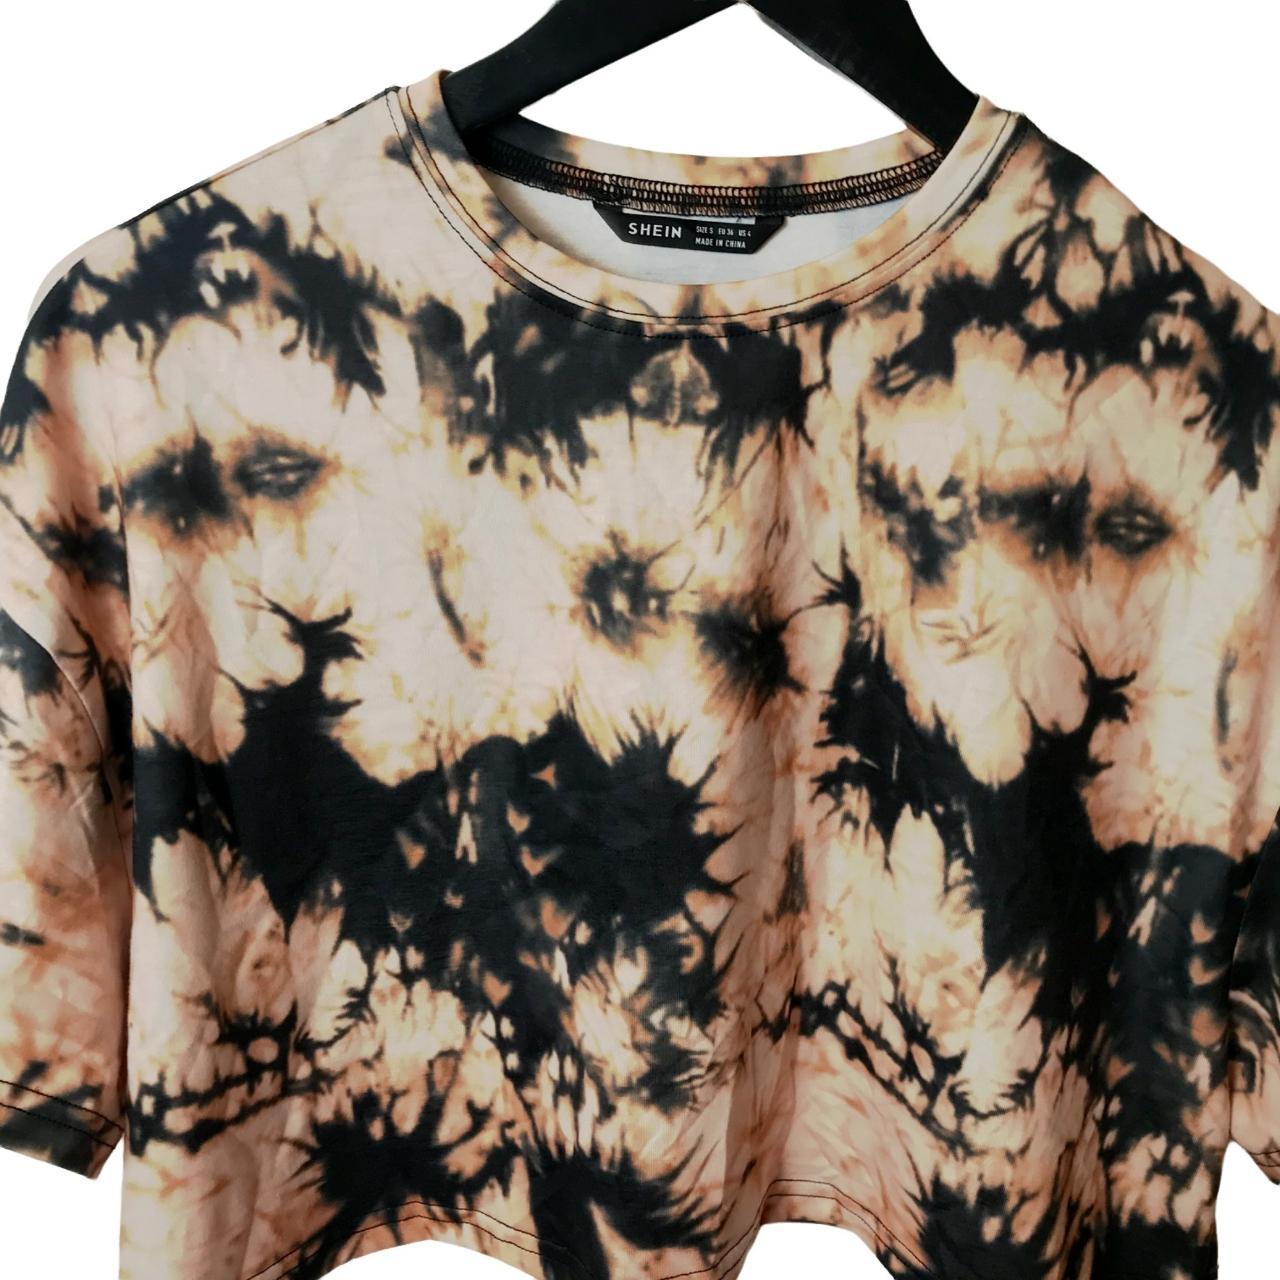 Product Image 2 - Shein Tee Crop Top Bleached